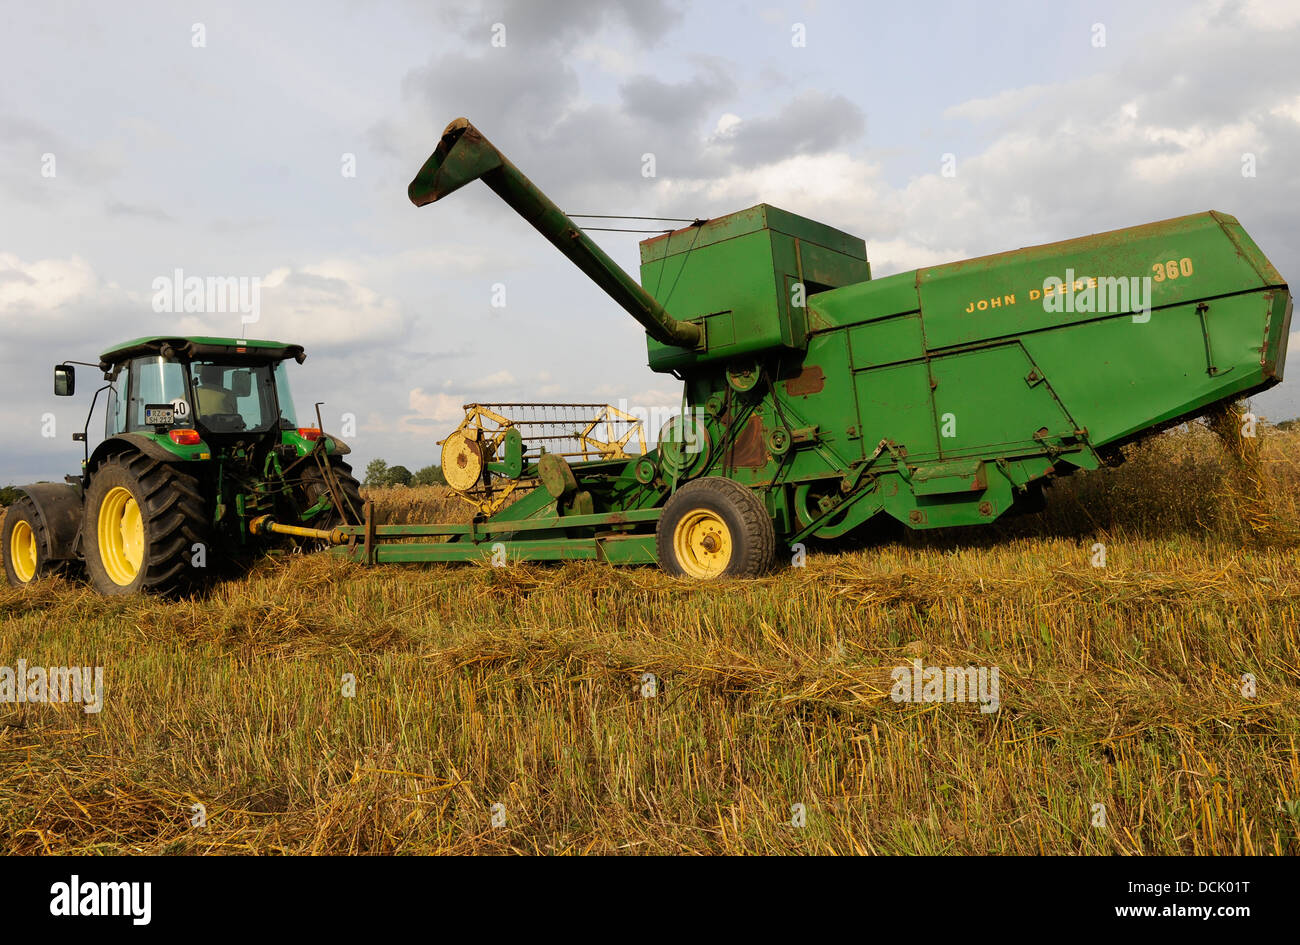 GERMANY old John Deere combine harvester 360 from 1968 pulled by tractor harvesting oats at organic farm Stock Photo